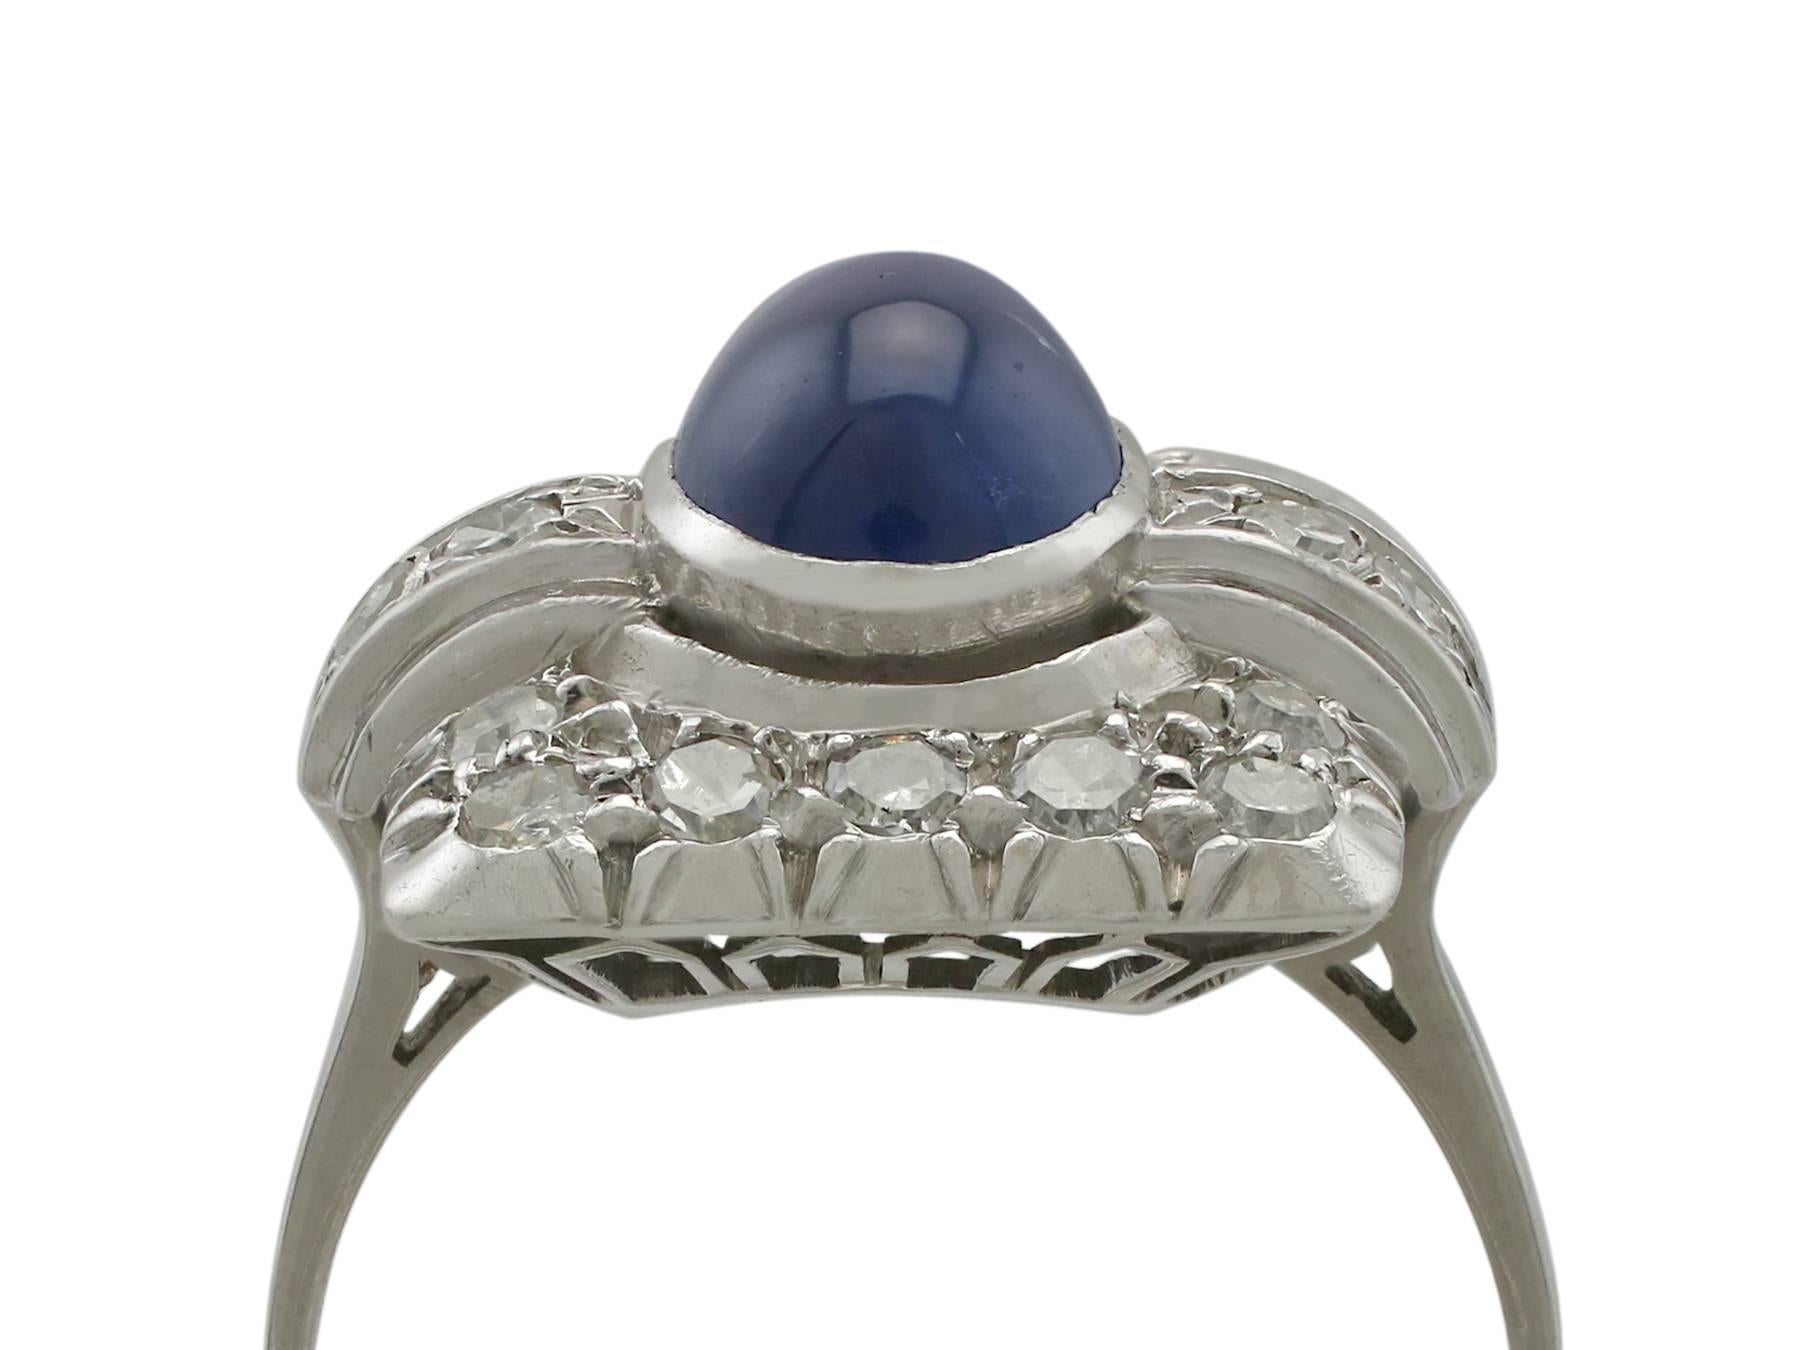 A fine antique Art Deco 1.85 carat blue sapphire and 0.36 carat diamond, platinum cluster ring; part of our diverse antique jewellery collections.

This fine and impressive sapphire cocktail ring has been crafted in platinum.

The pierced decorated